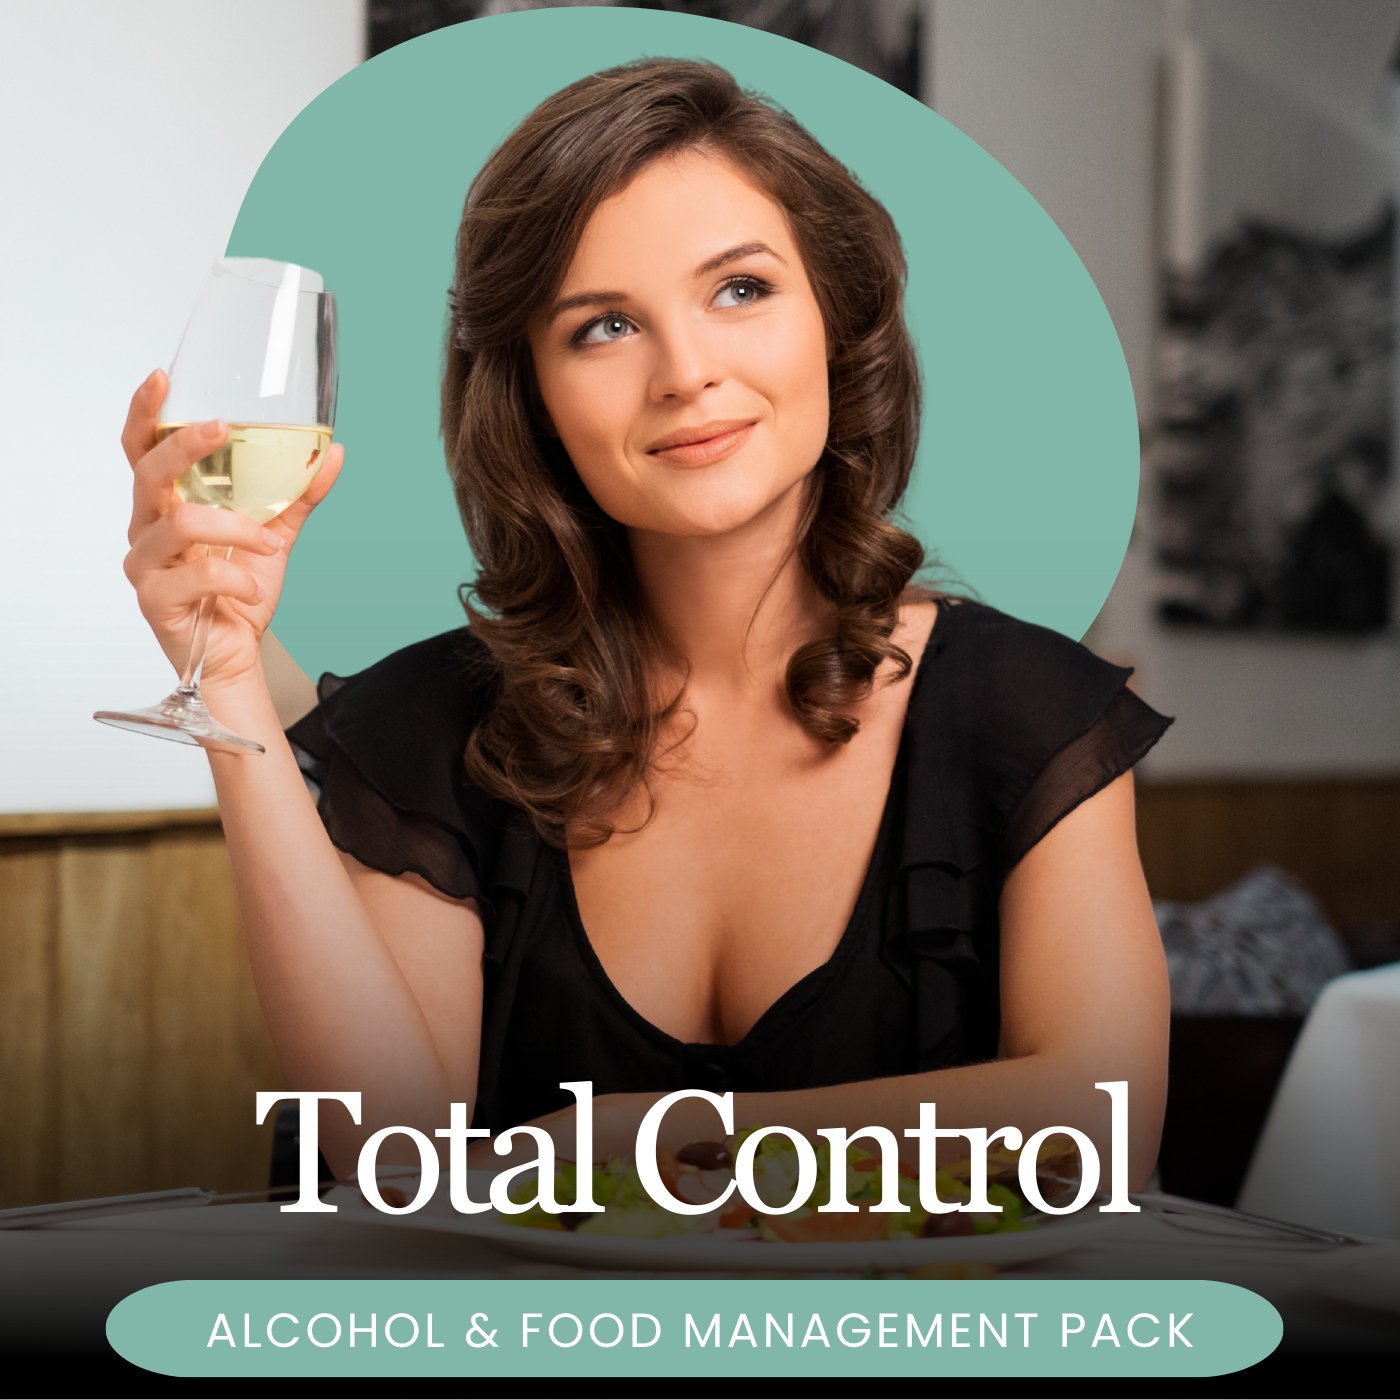 Control Alcohol Consumption hypnotherapy - Sleep Edition - Clearmindshypnotherapy